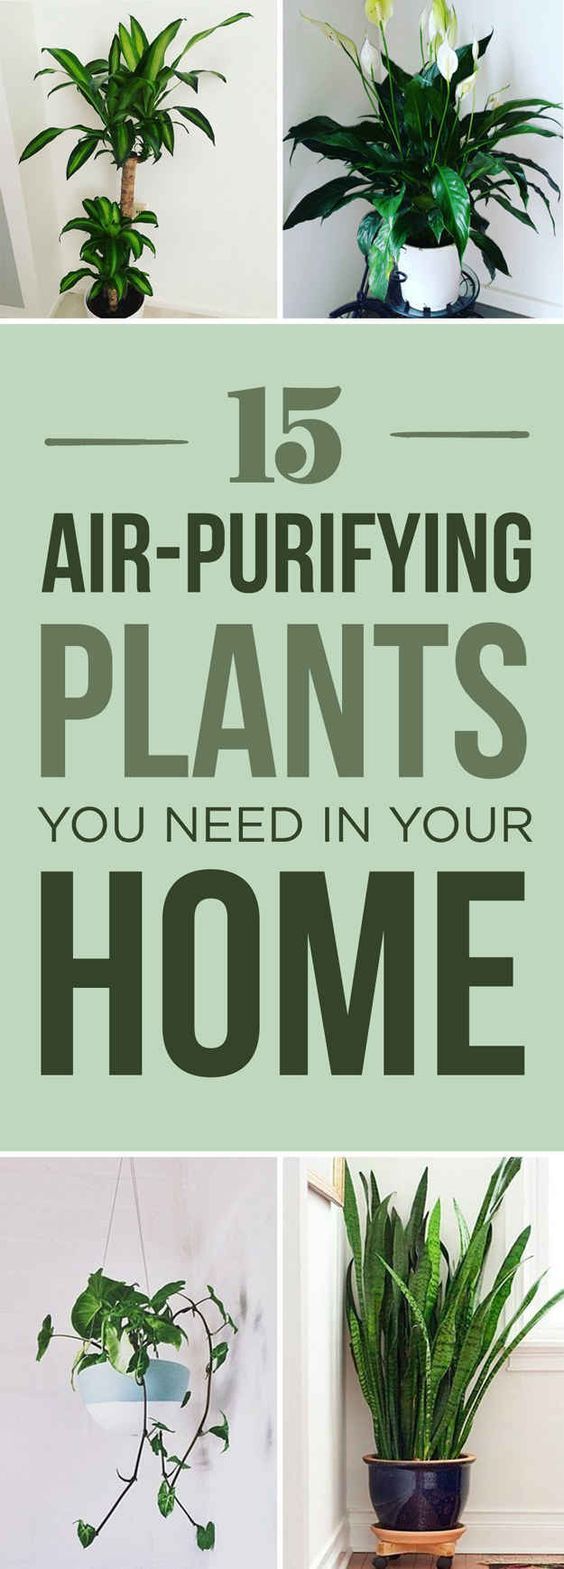 15 Air-Purifying Plants That Will Turn Your Home Into A Lush Forest